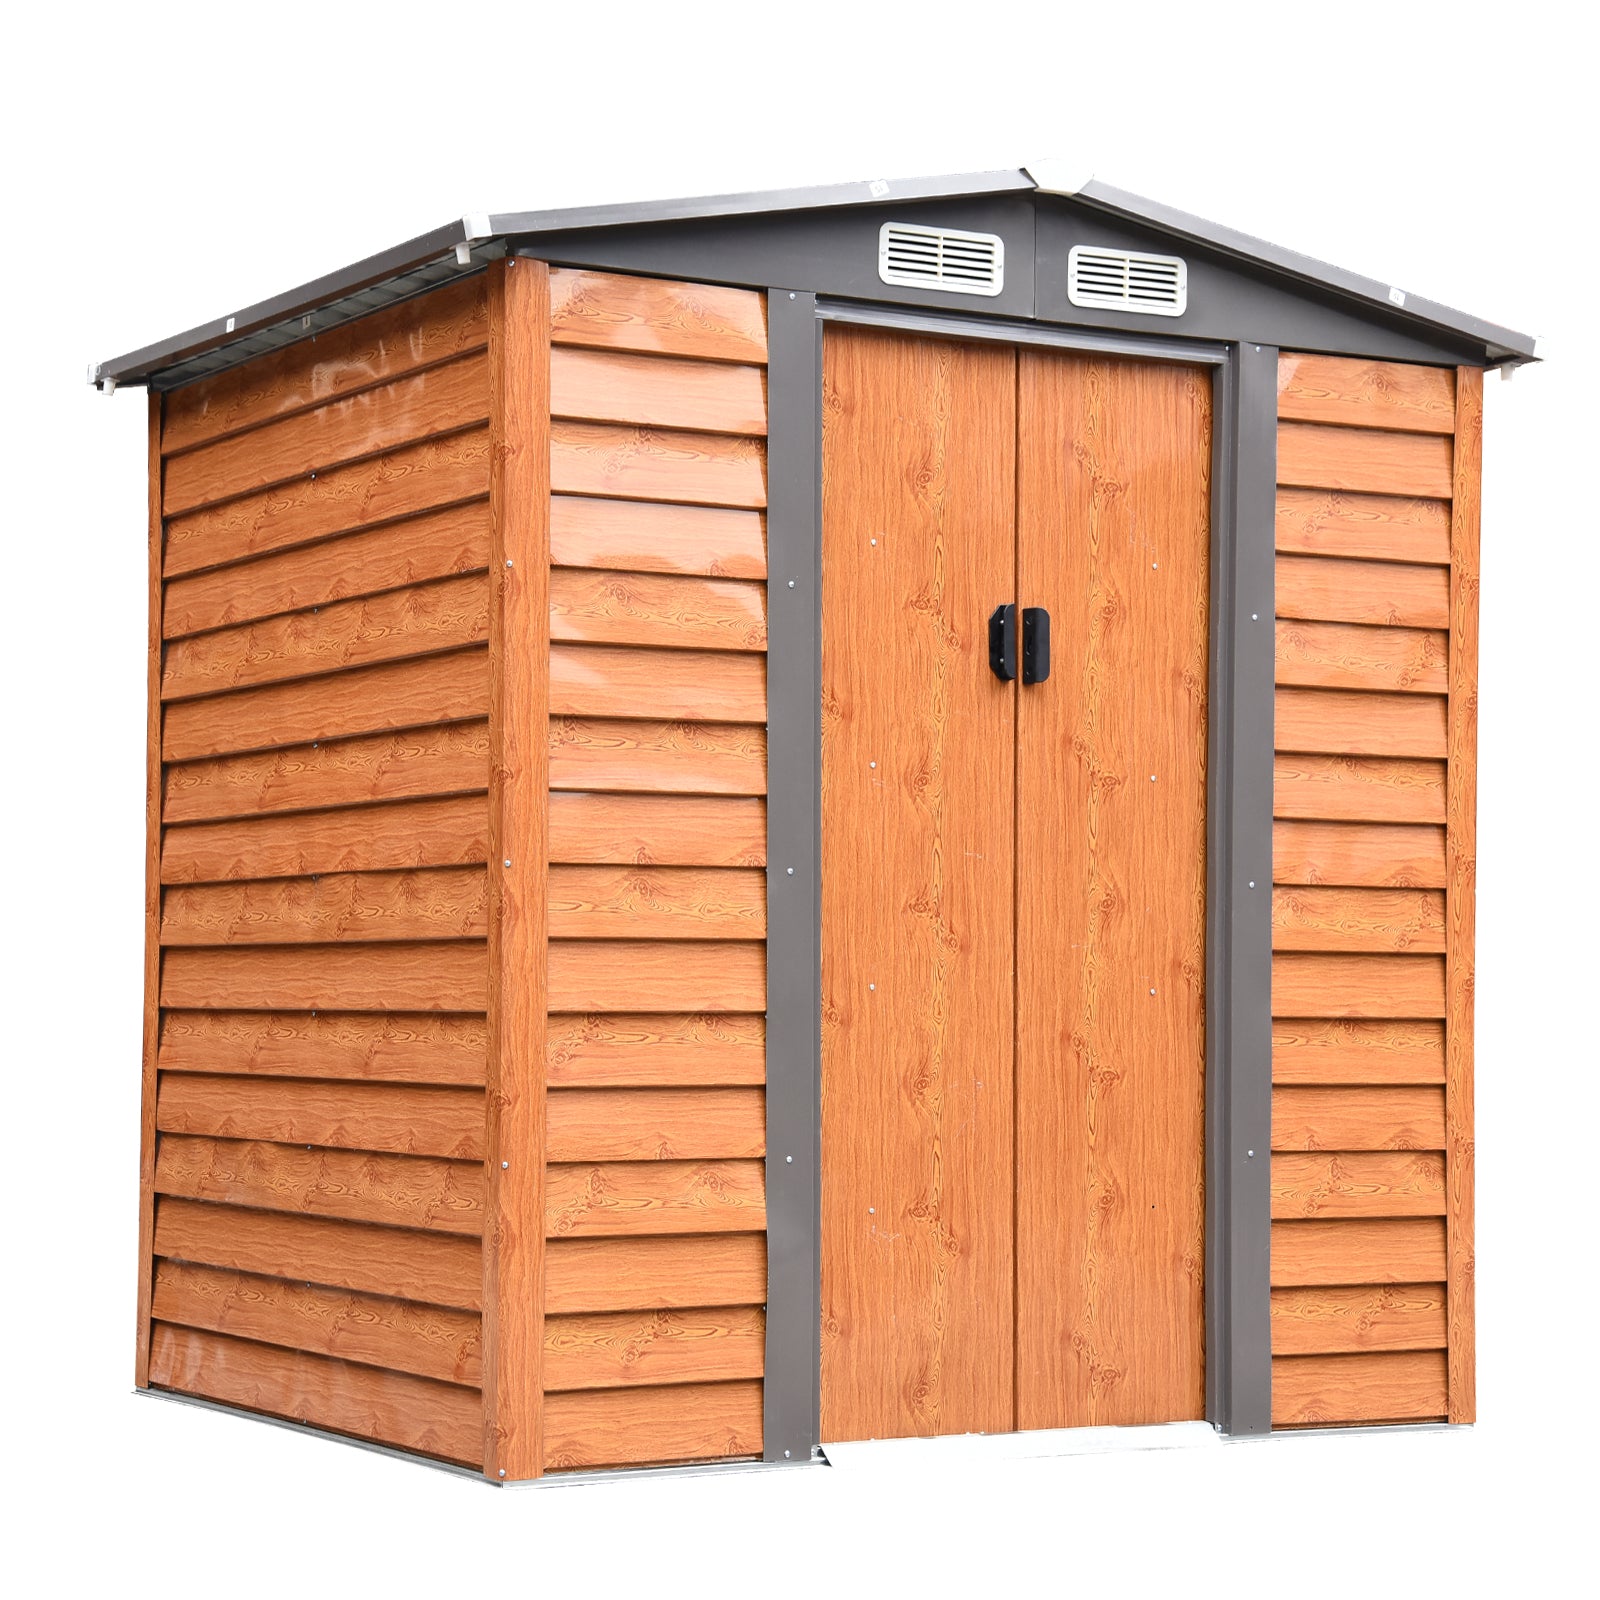 Outsunny 6.5x5.2ft Garden Shed Wood Effect Tool Storage Sliding Door Wood Grain  | TJ Hughes